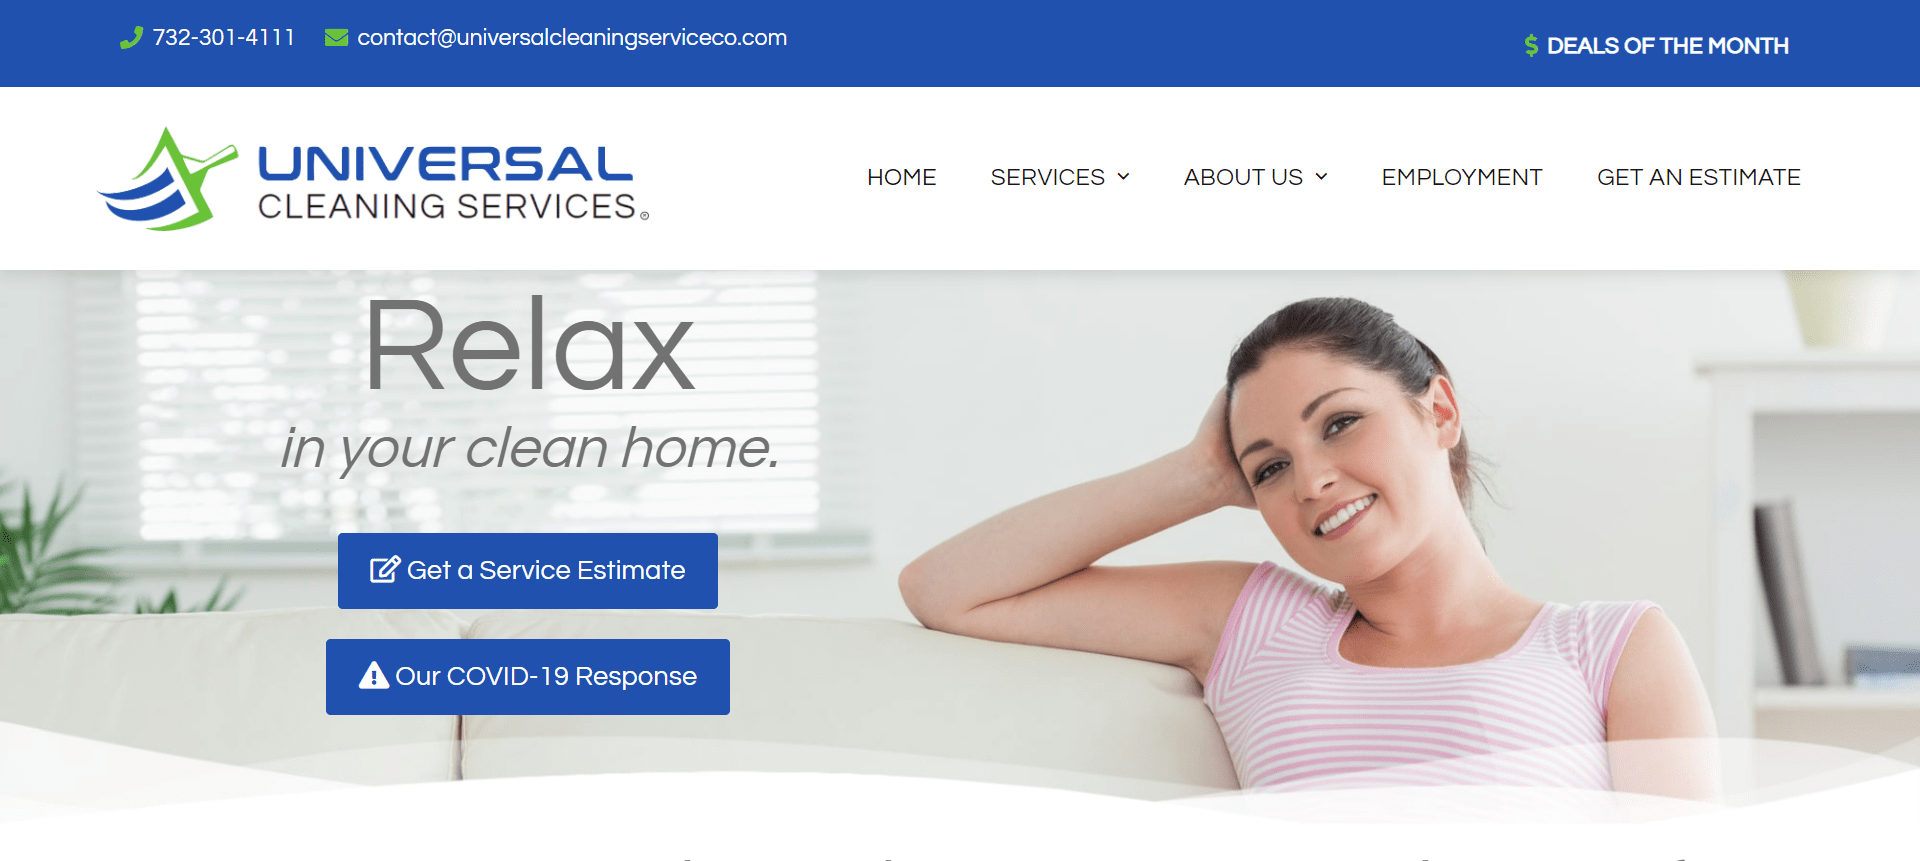 Universal Cleaning Services homepage image